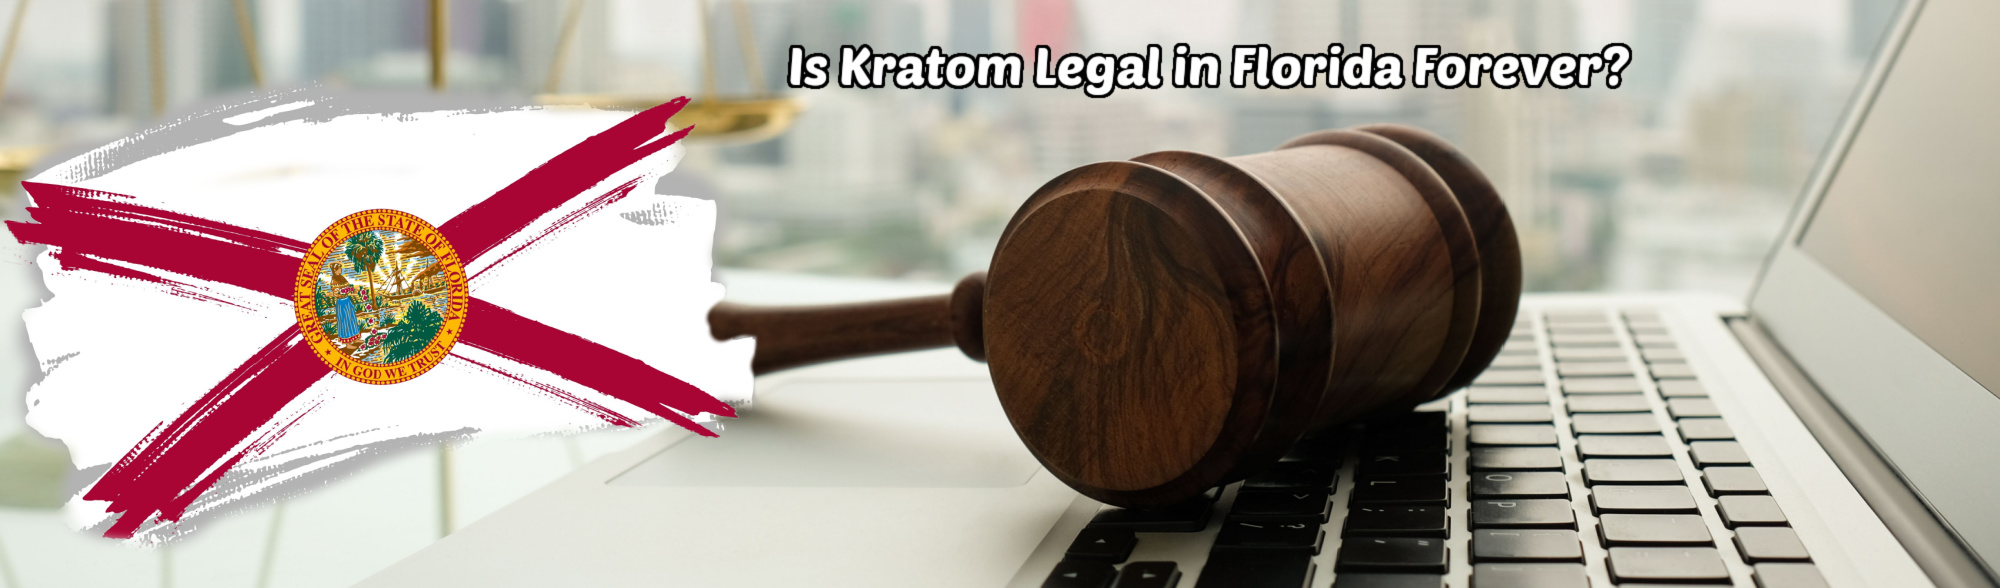 image of is kratom legal in florida forever